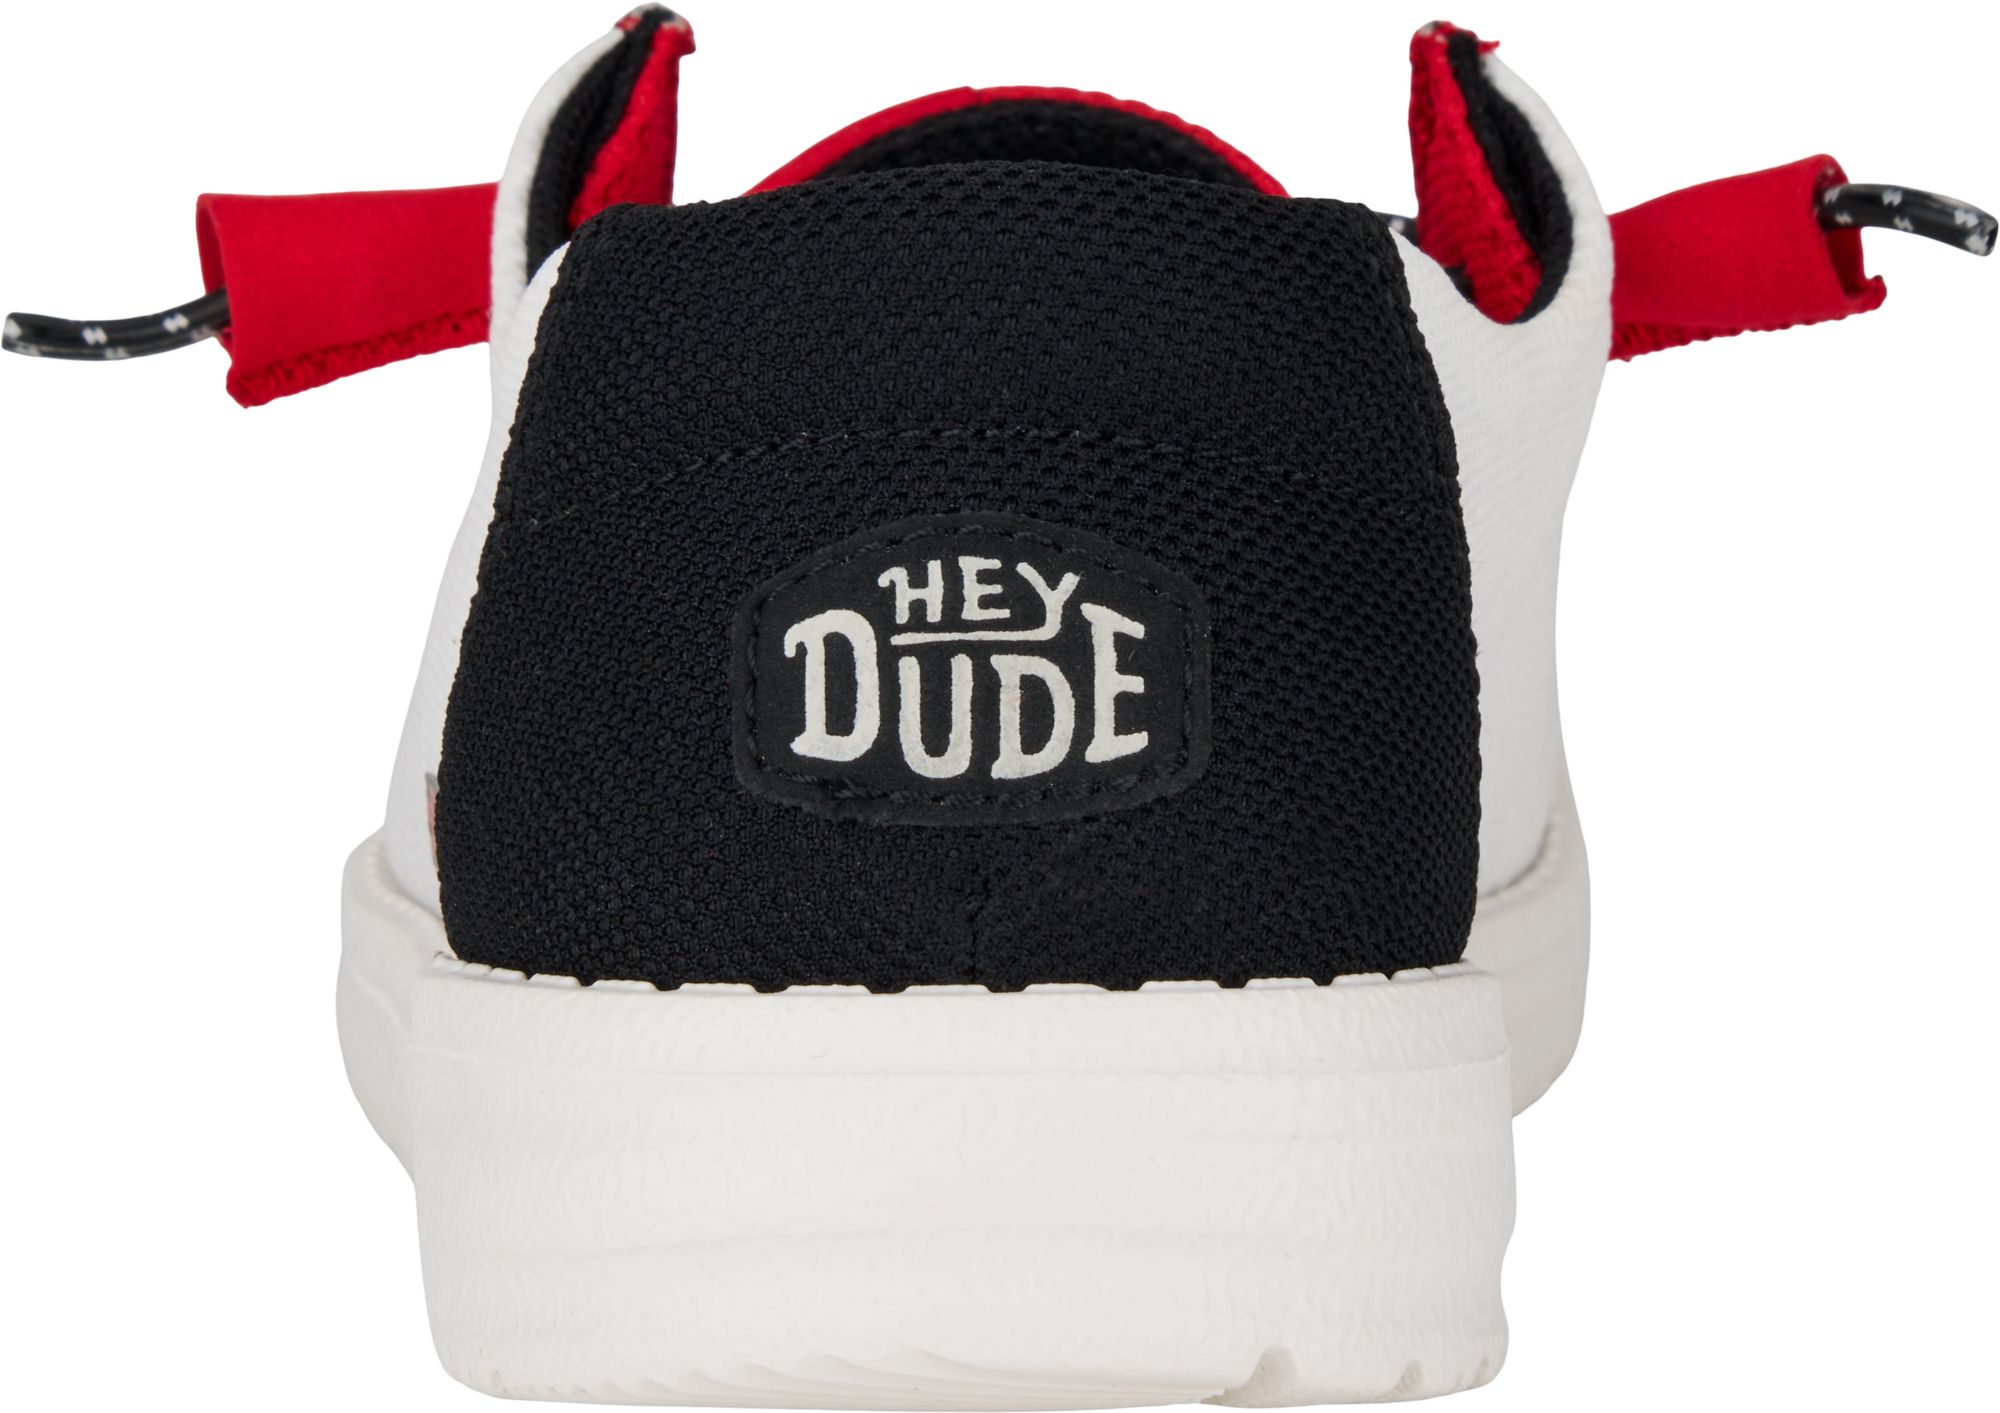 Hey Dude Shoes  Available at DICK'S